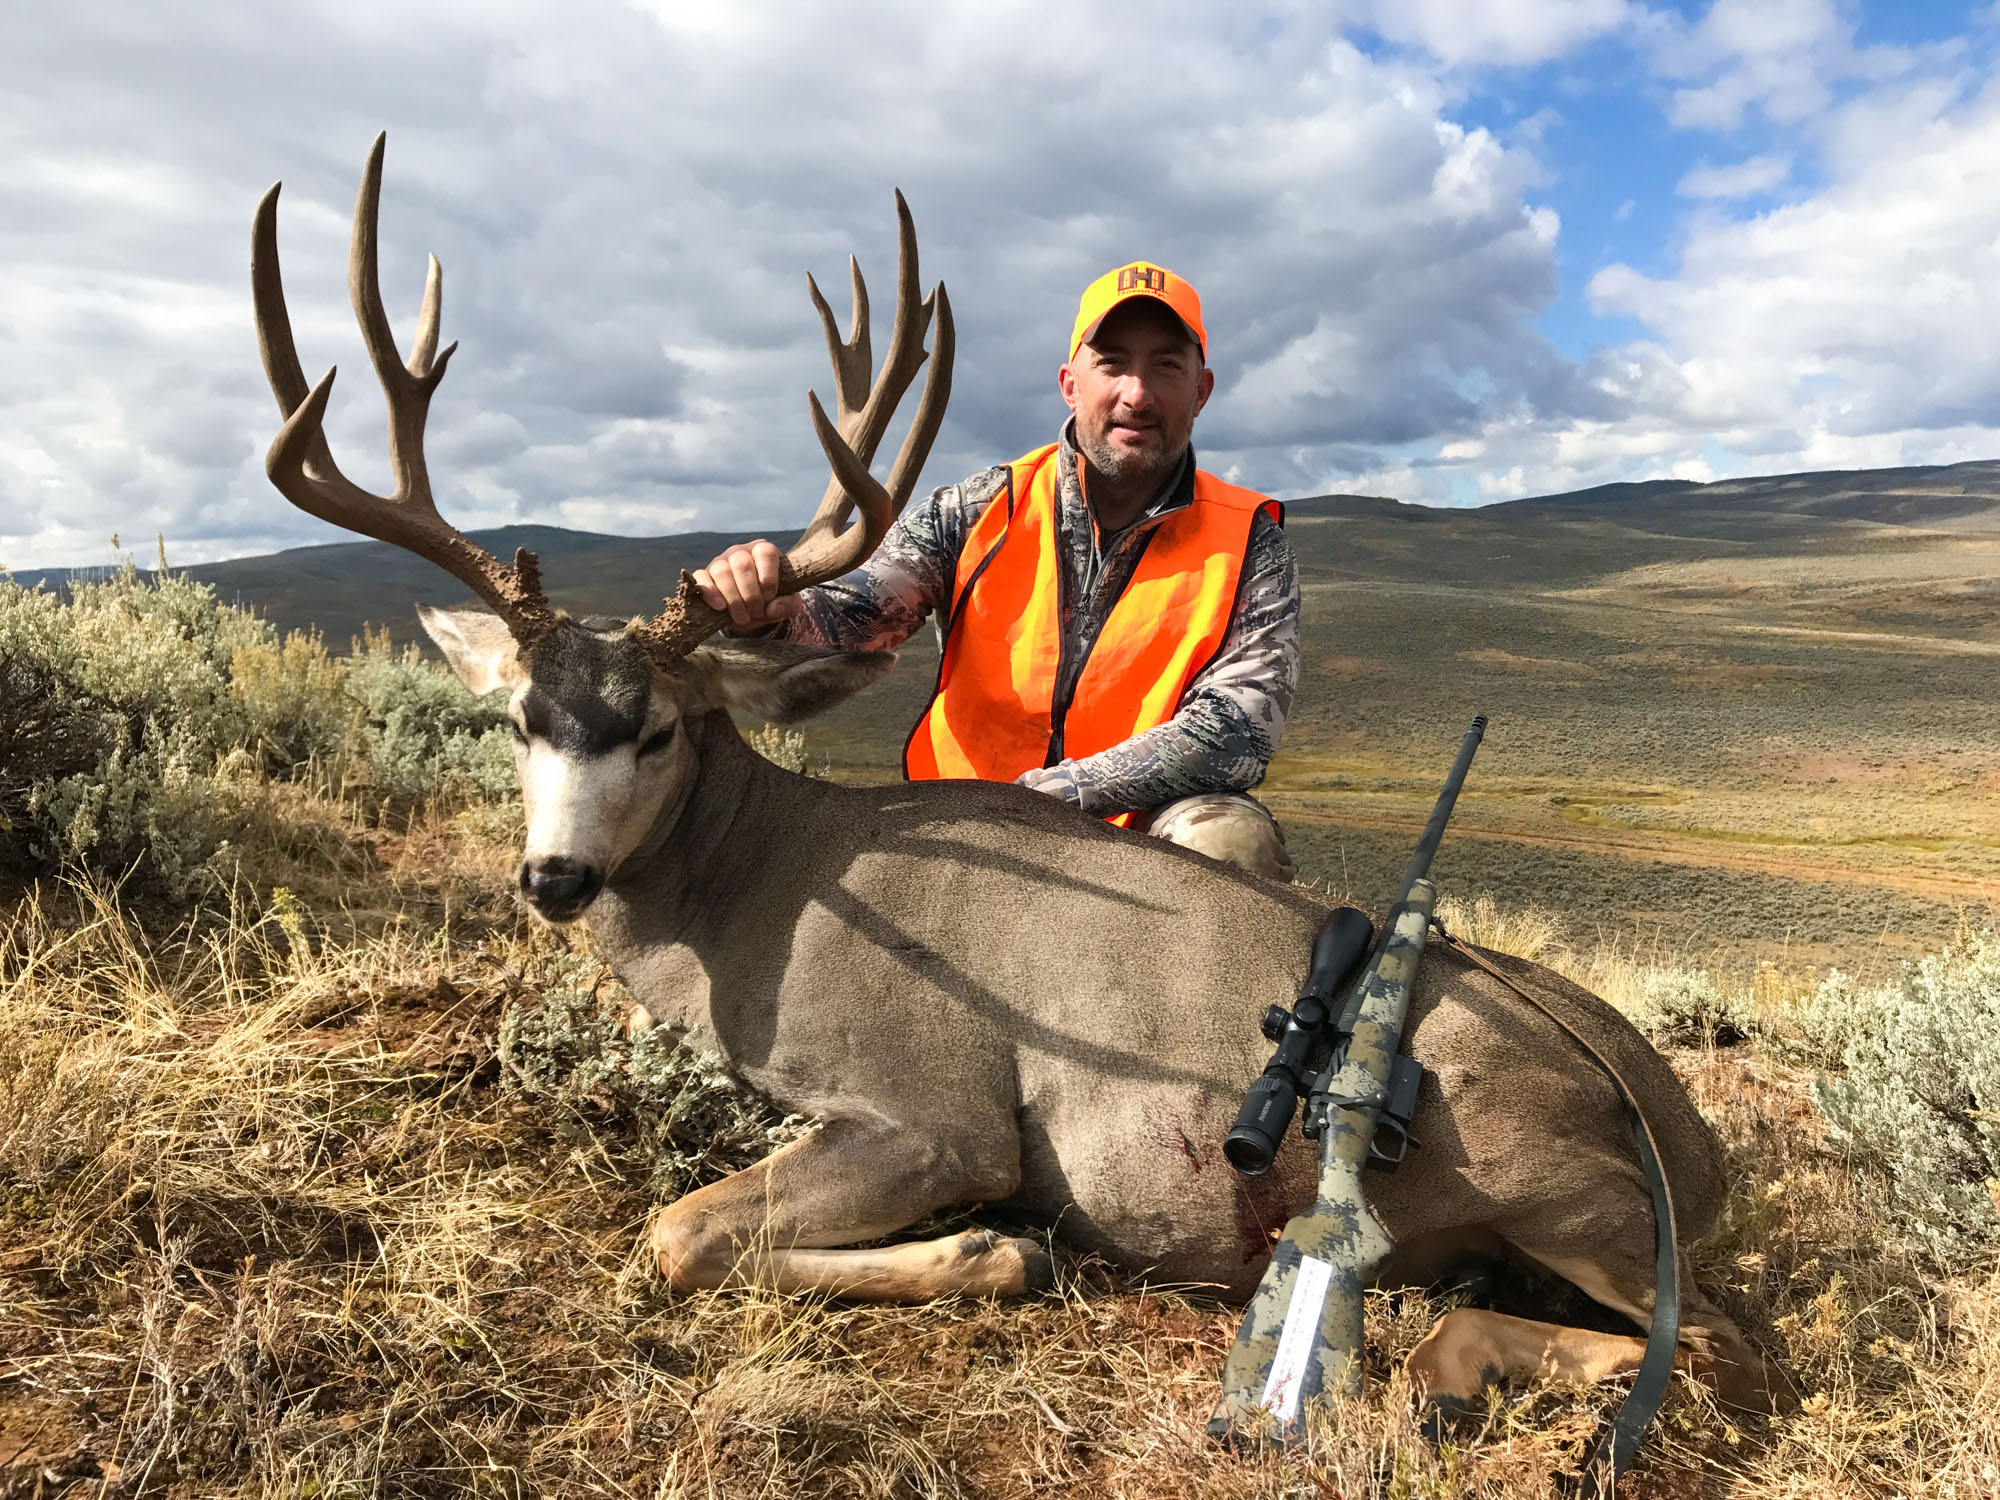 The 6.5 PRC is one of the best choices for mule deer.